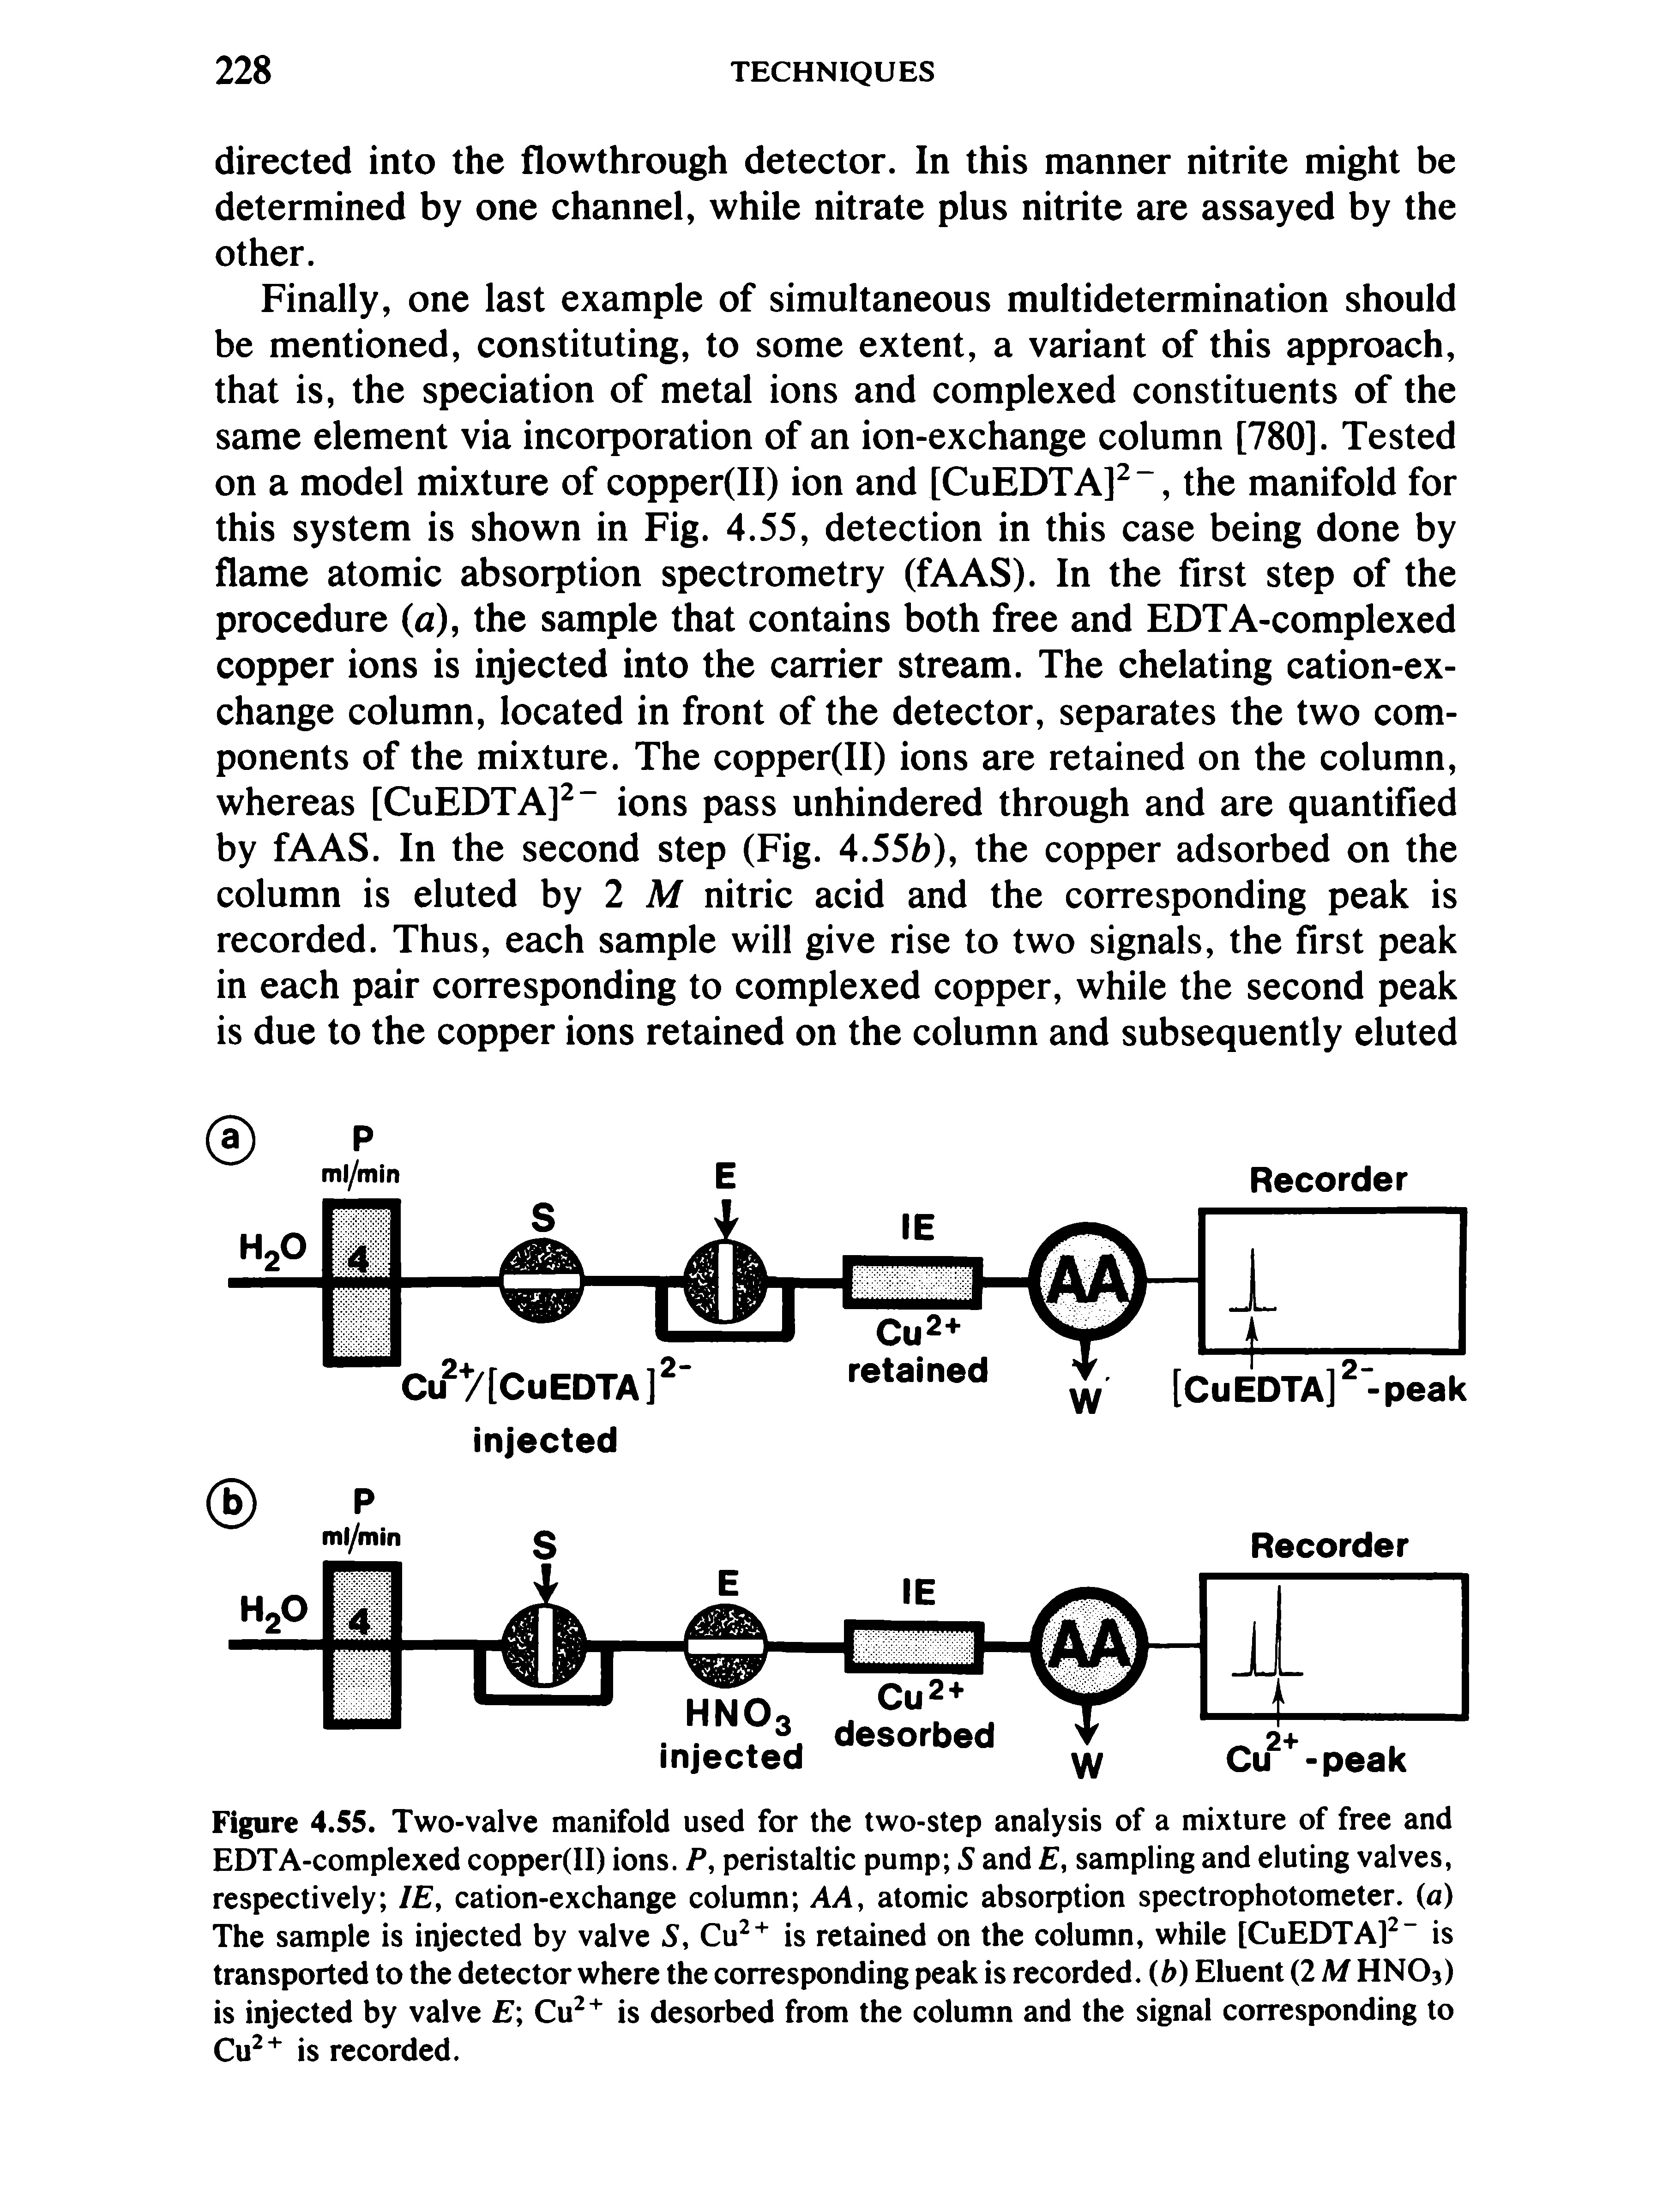 Figure 4.55. Two-valve manifold used for the two-step analysis of a mixture of free and EDTA-complexed copper(II) ions. P, peristaltic pump S and , sampling and eluting valves, respectively IE, cation-exchange column AA, atomic absorption spectrophotometer, (a) The sample is injected by valve S, Cu " is retained on the column, while [CuEDTAf" is transported to the detector where the corresponding peak is recorded, (b) Eluent (2 M HNO3) is injected by valve E Cu is desorbed from the column and the signal corresponding to Cu " is recorded.